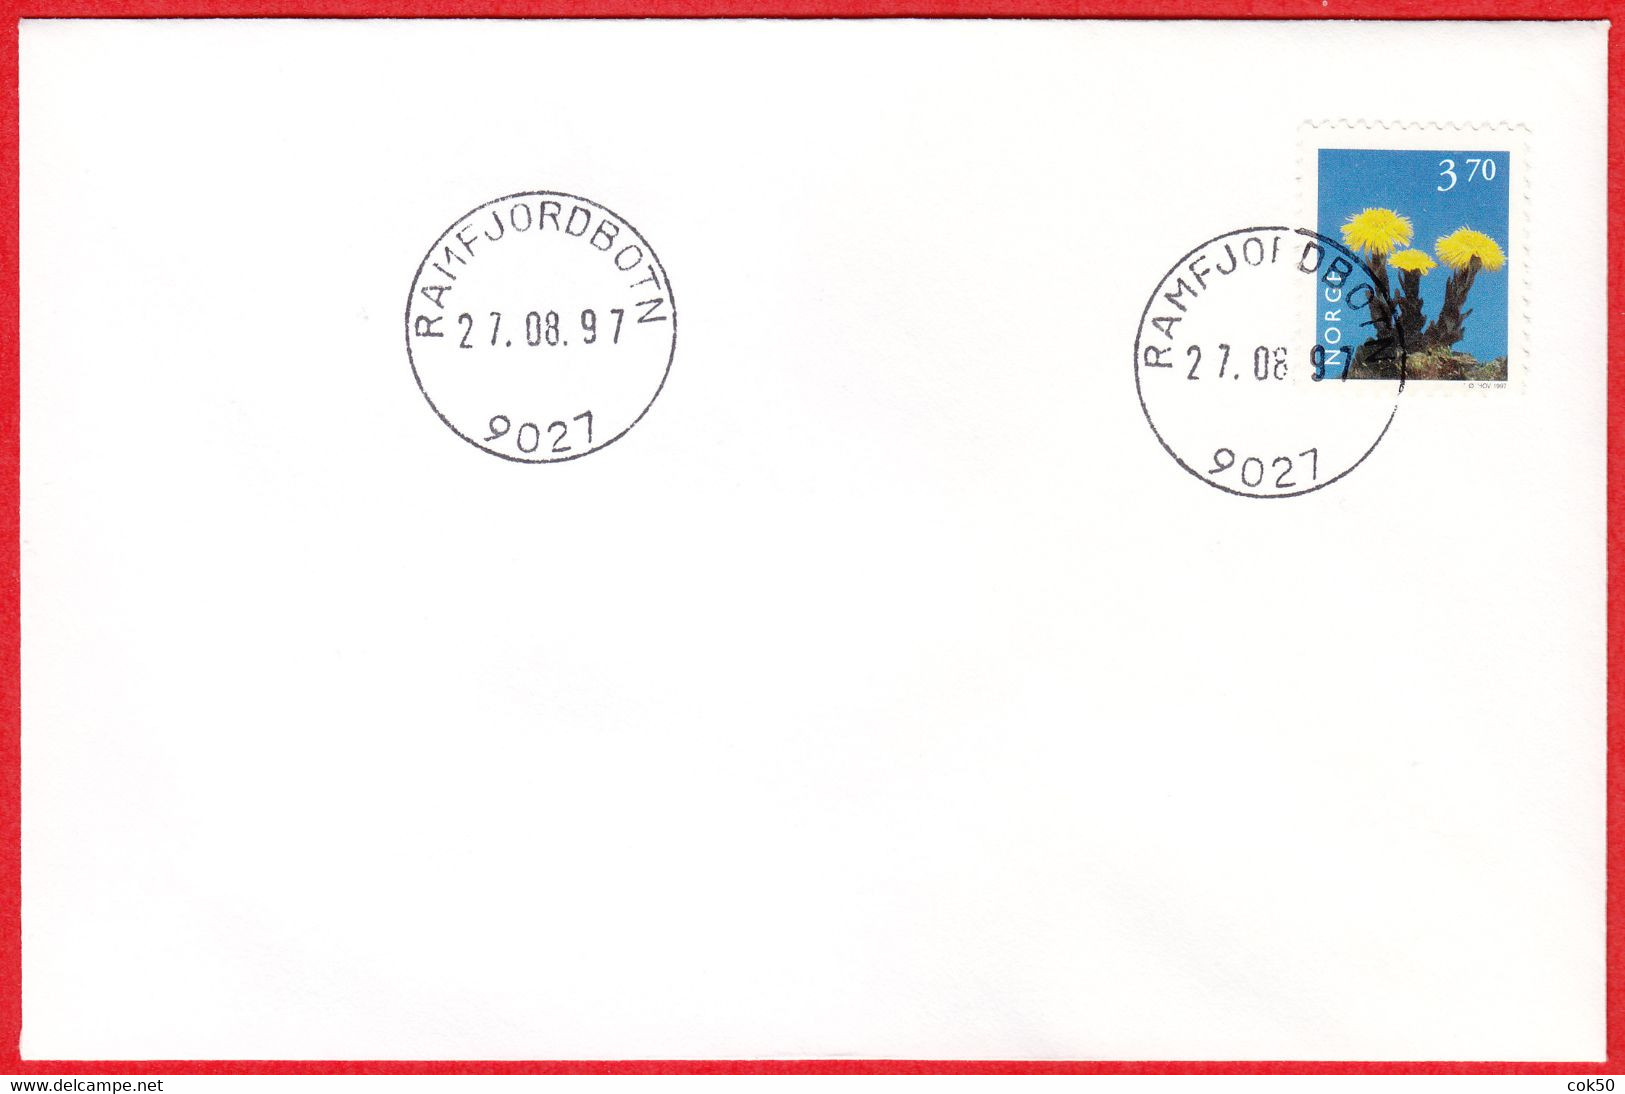 NORWAY -  9027 RAMFJORDBOTN - 24 MmØ - (Troms County) - Last Day/postoffice Closed On 1997.08.27 - Local Post Stamps